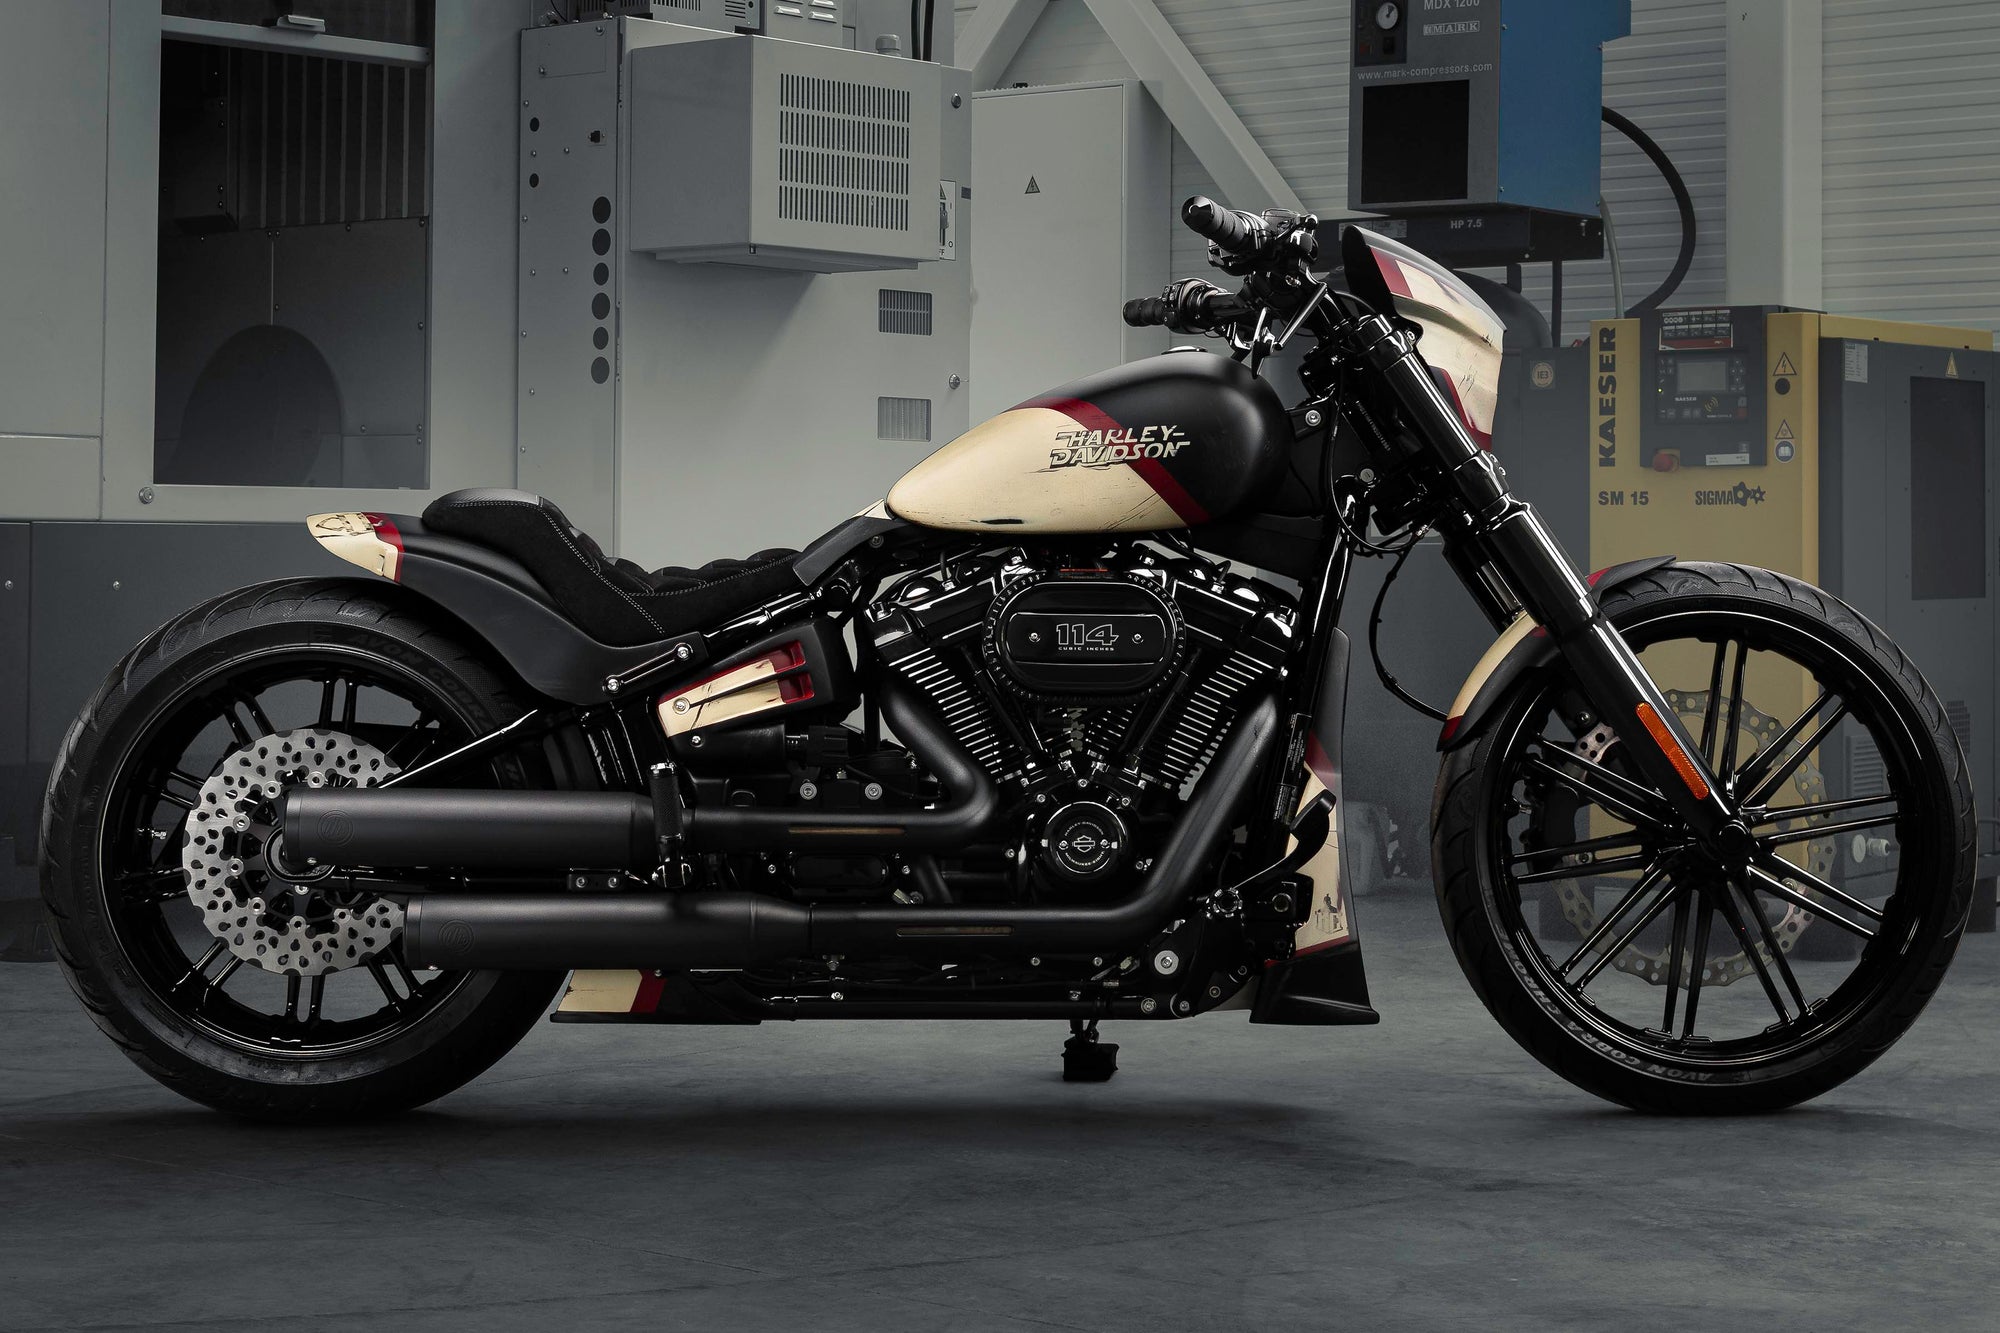 Modified Harley Davidson Breakout motorcycle with Killer Custom parts from the side in a modern bike shop